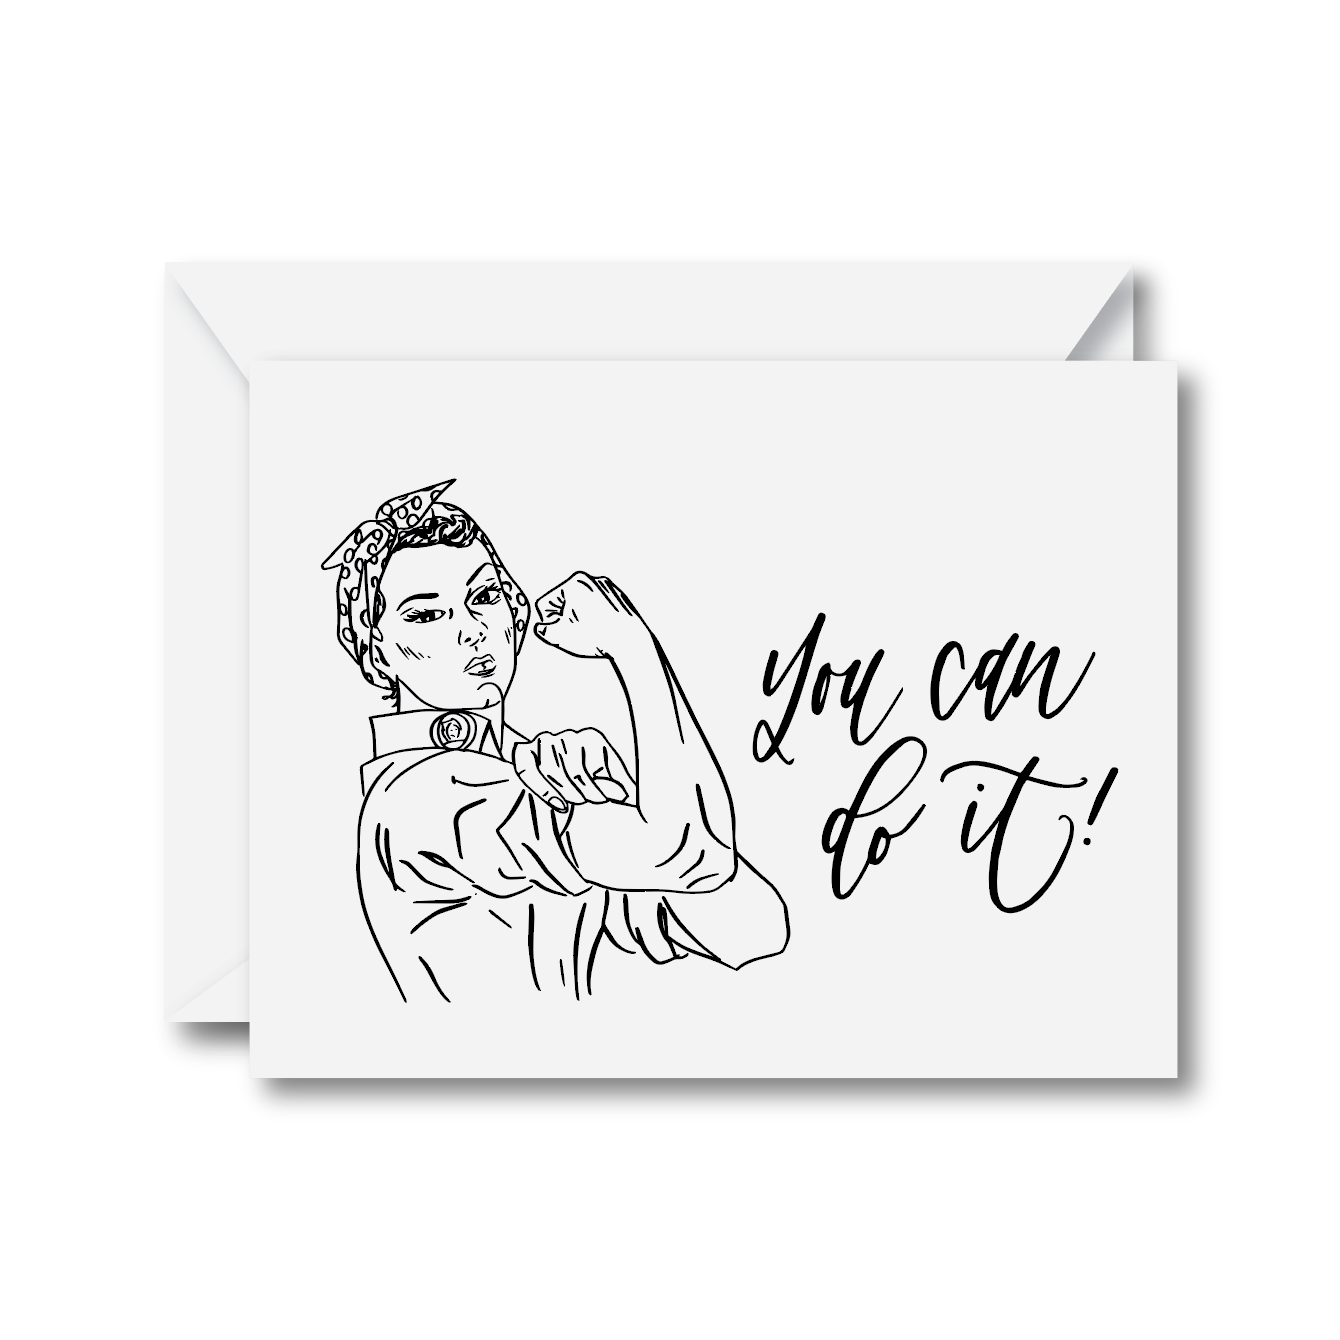 Rosie the Riveter “You Can Do It” Card